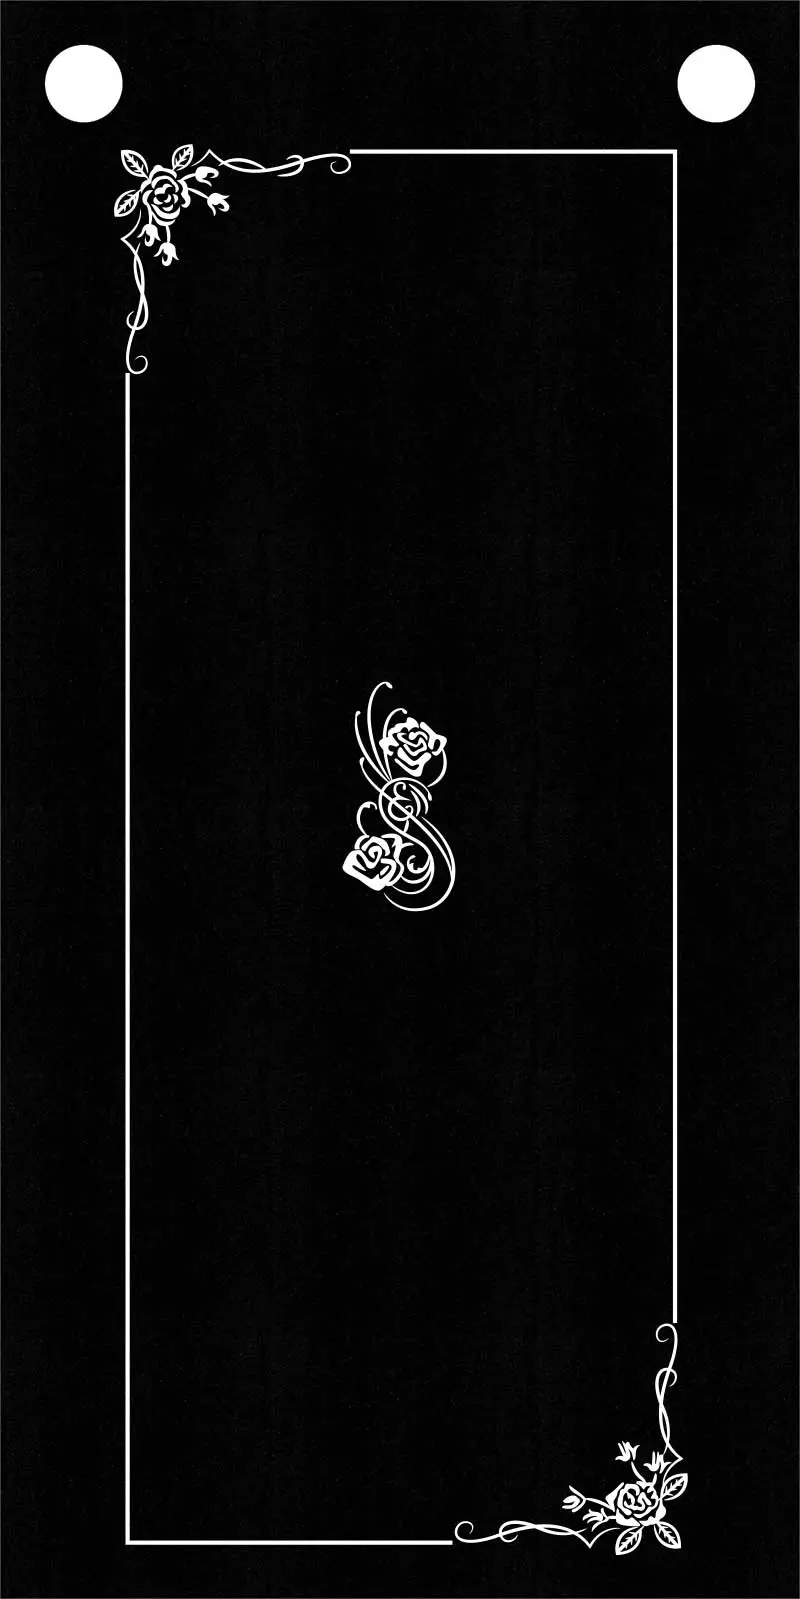 MMFL-112 Examples of Engraved Borders o Flat Granite Memorial Ledgers for gravesites, grave markers, significant events.